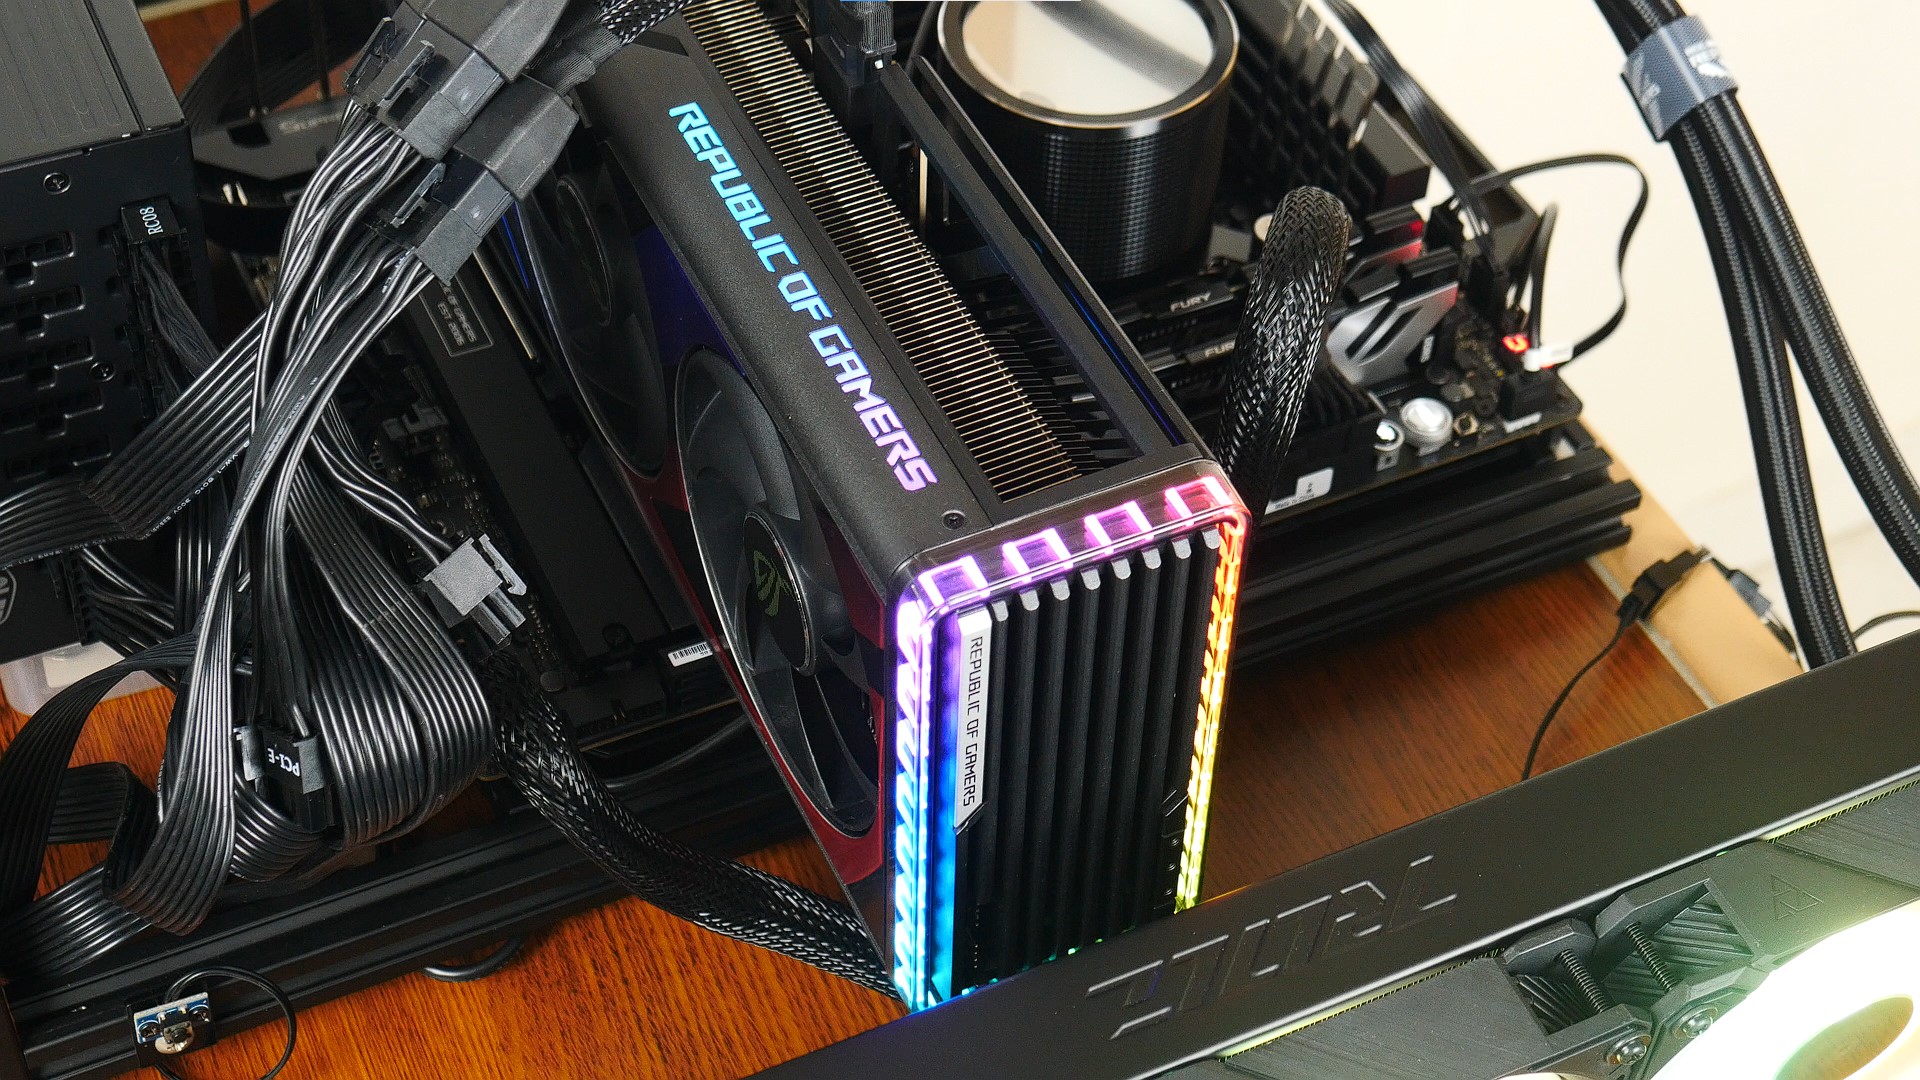 On the Test Bench: Intel Core i9-13900K, Kingston Fury Renegade DDR5 7200,  ASUS GeForce RTX 4090 OC